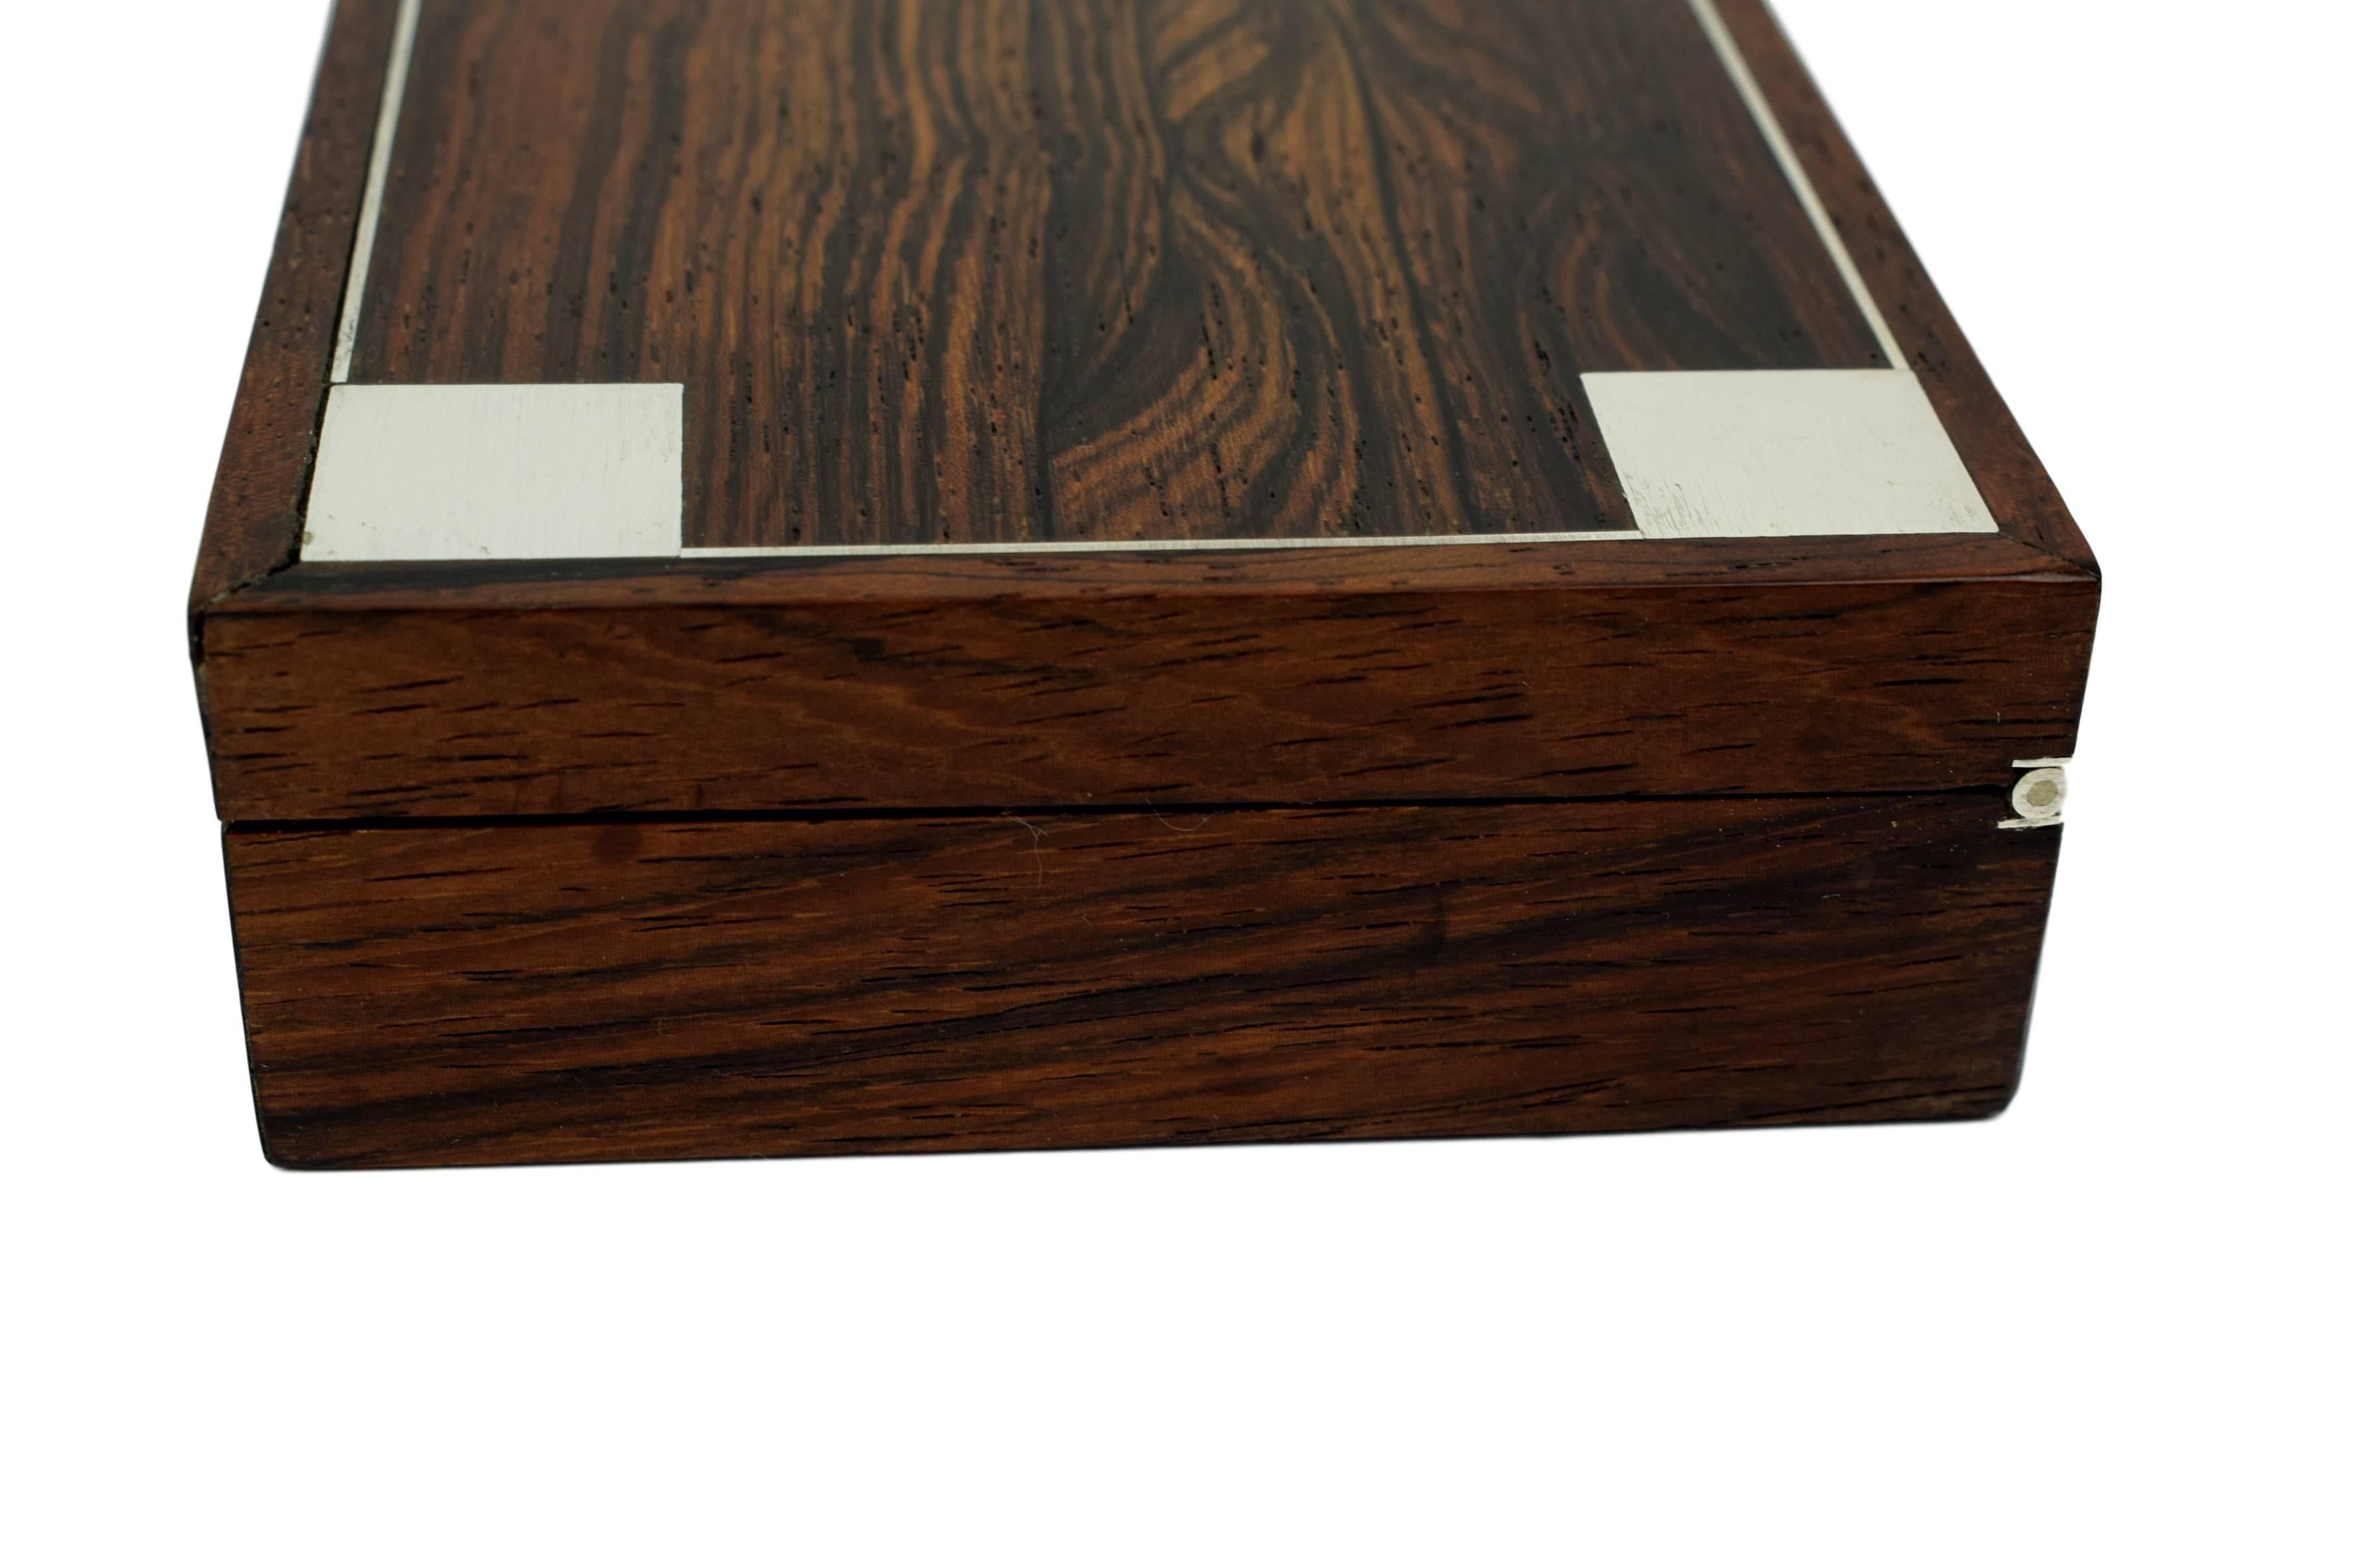 Danish Midcentury Rosewood Box with Sterling 925 Silver Inlays by Hans Hansen In Good Condition For Sale In Denmark, DK